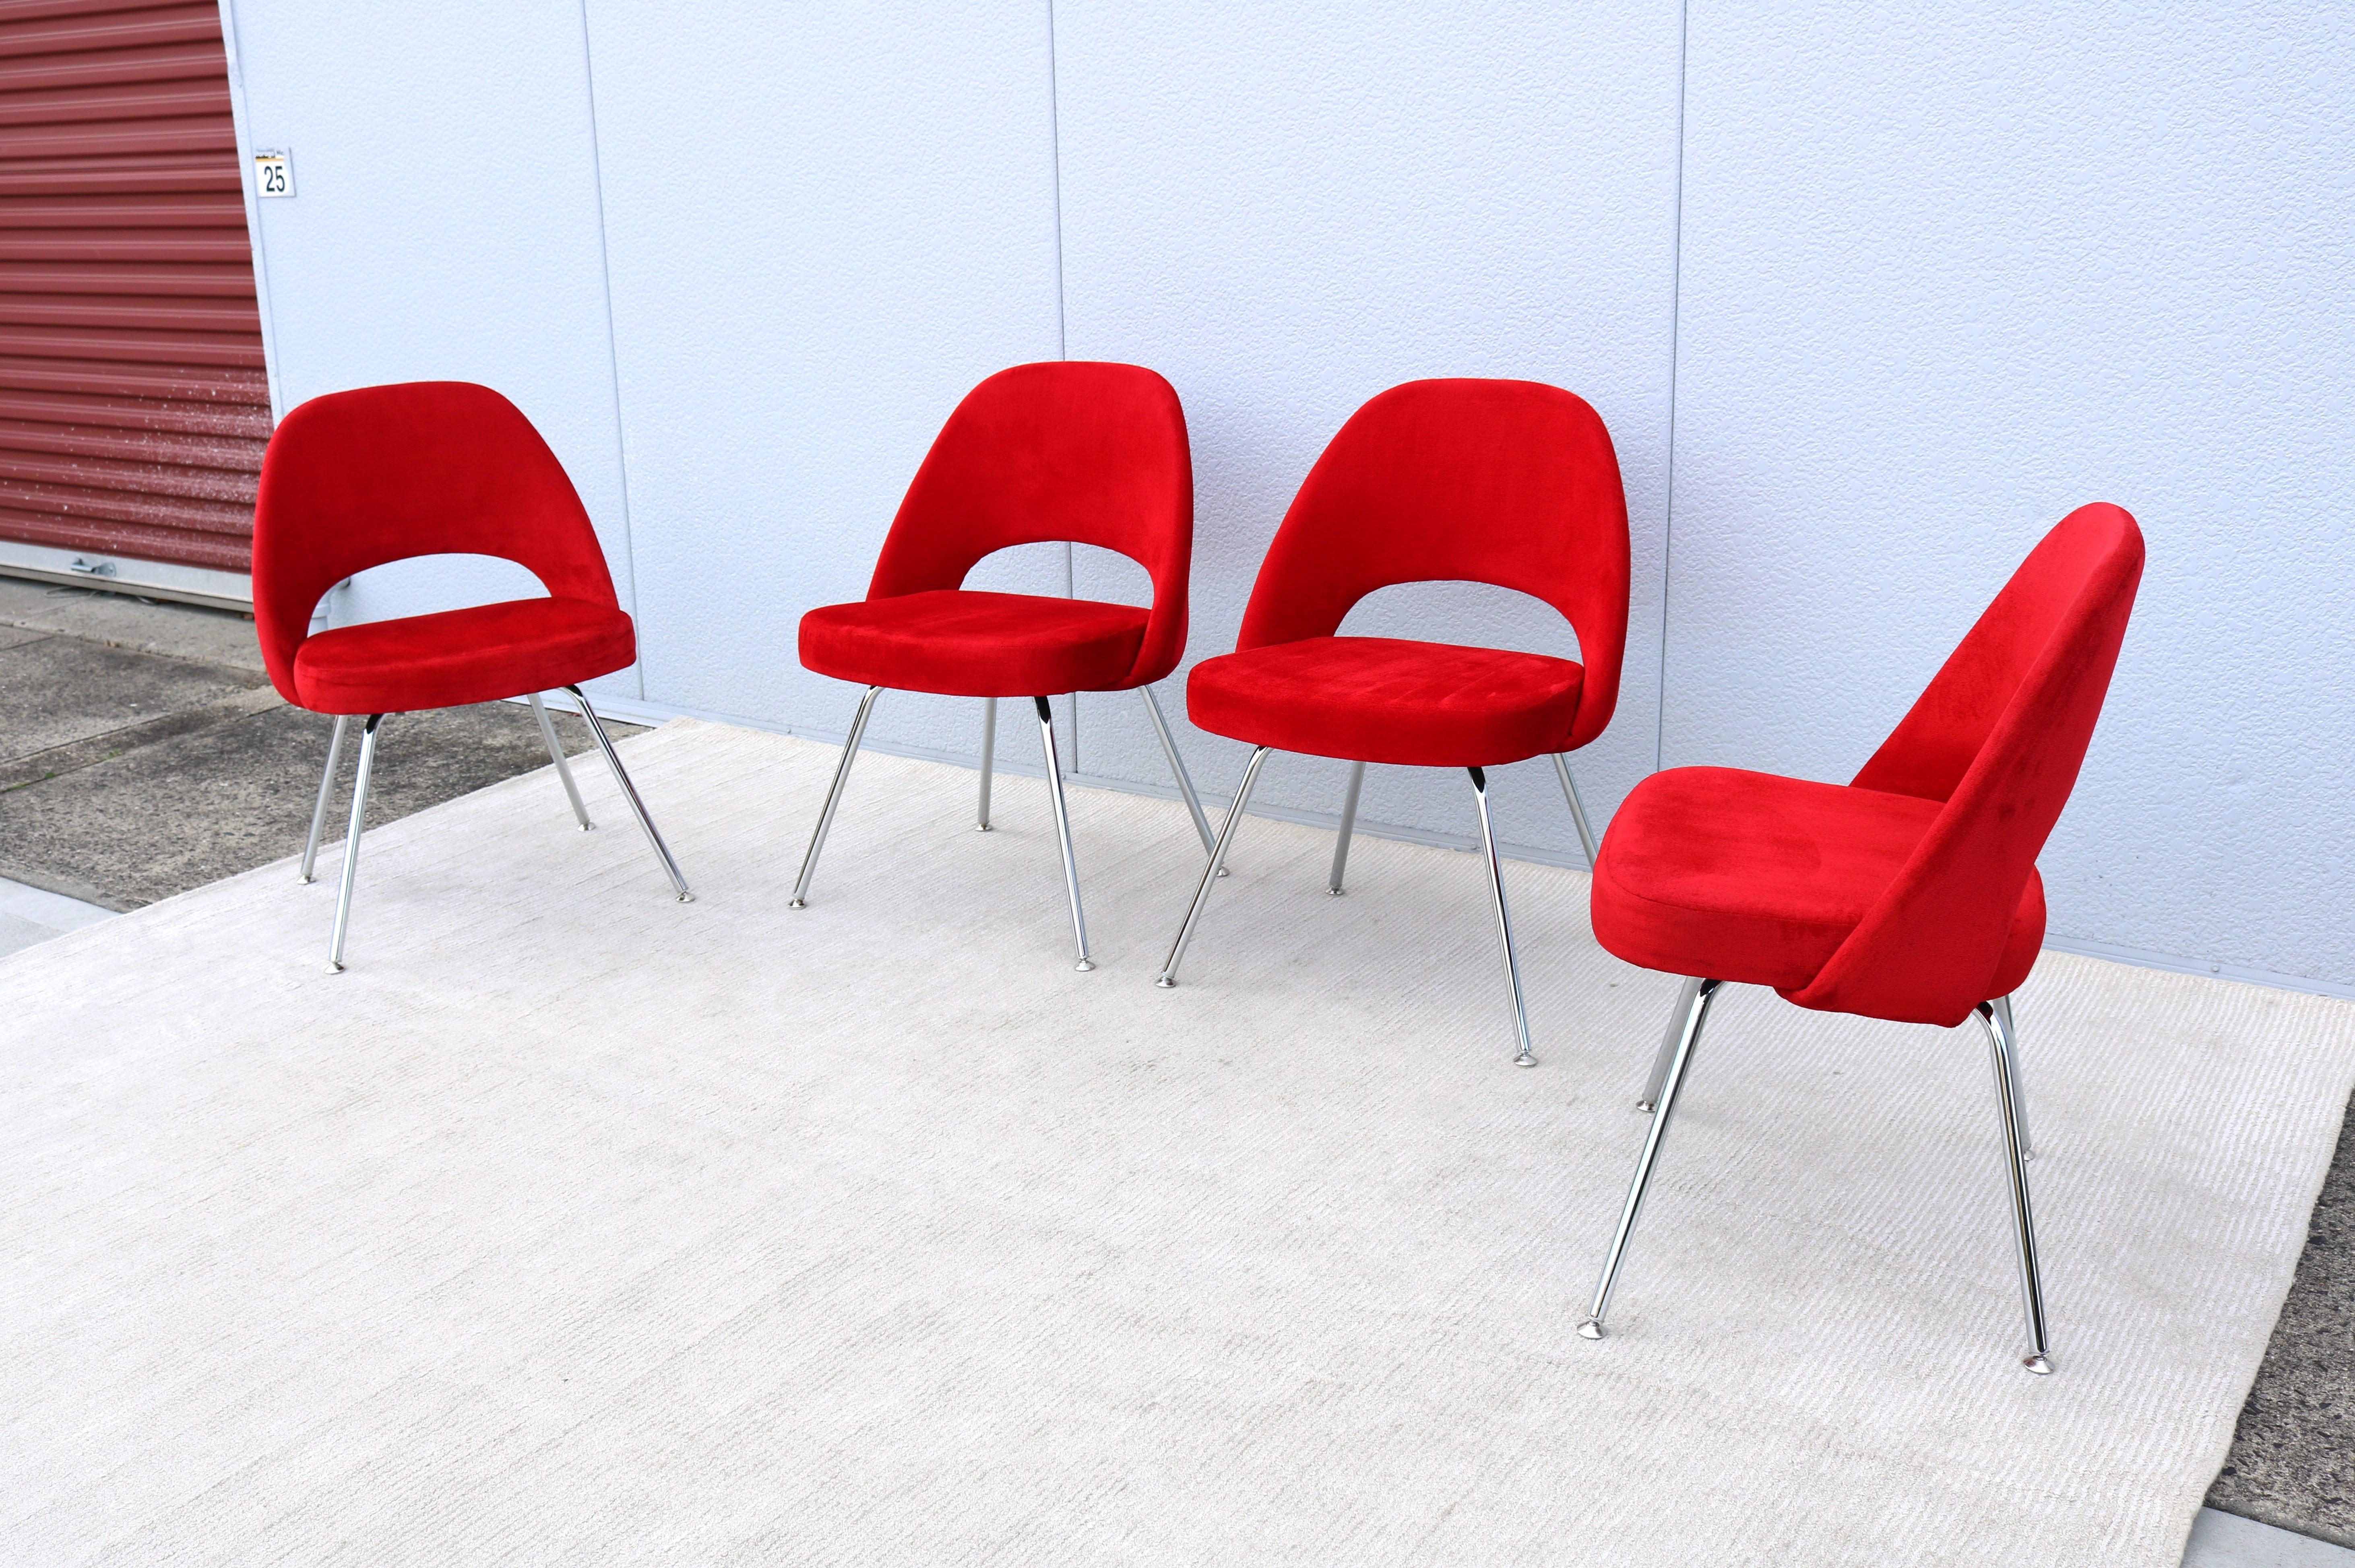 Steel Mid-Century Modern Eero Saarinen for Knoll Red Executive Armless Chairs Set of 4 For Sale